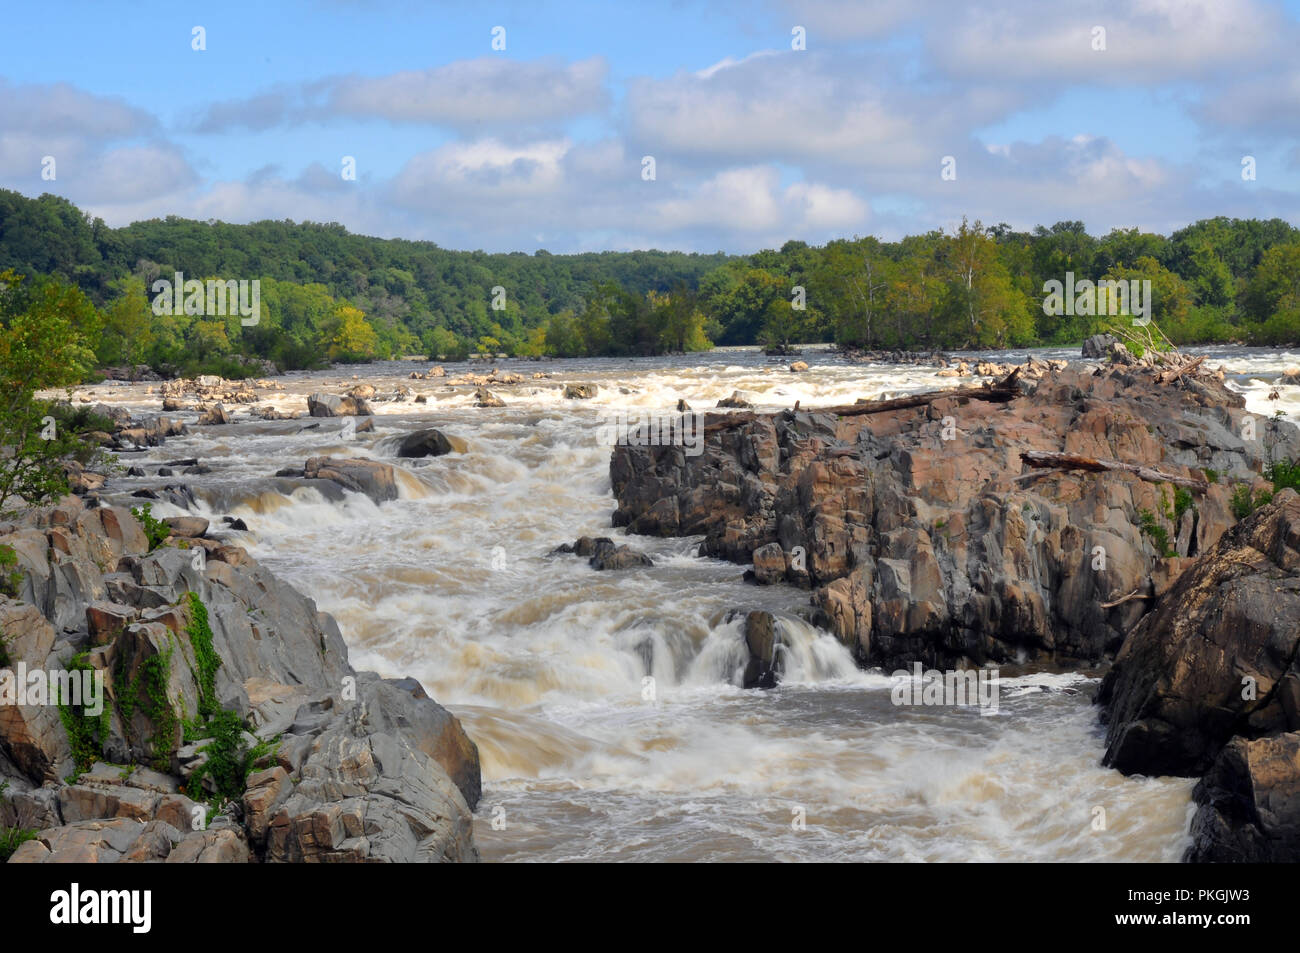 A View of the Falls at Great Falls Park in Virginia Stock Photo